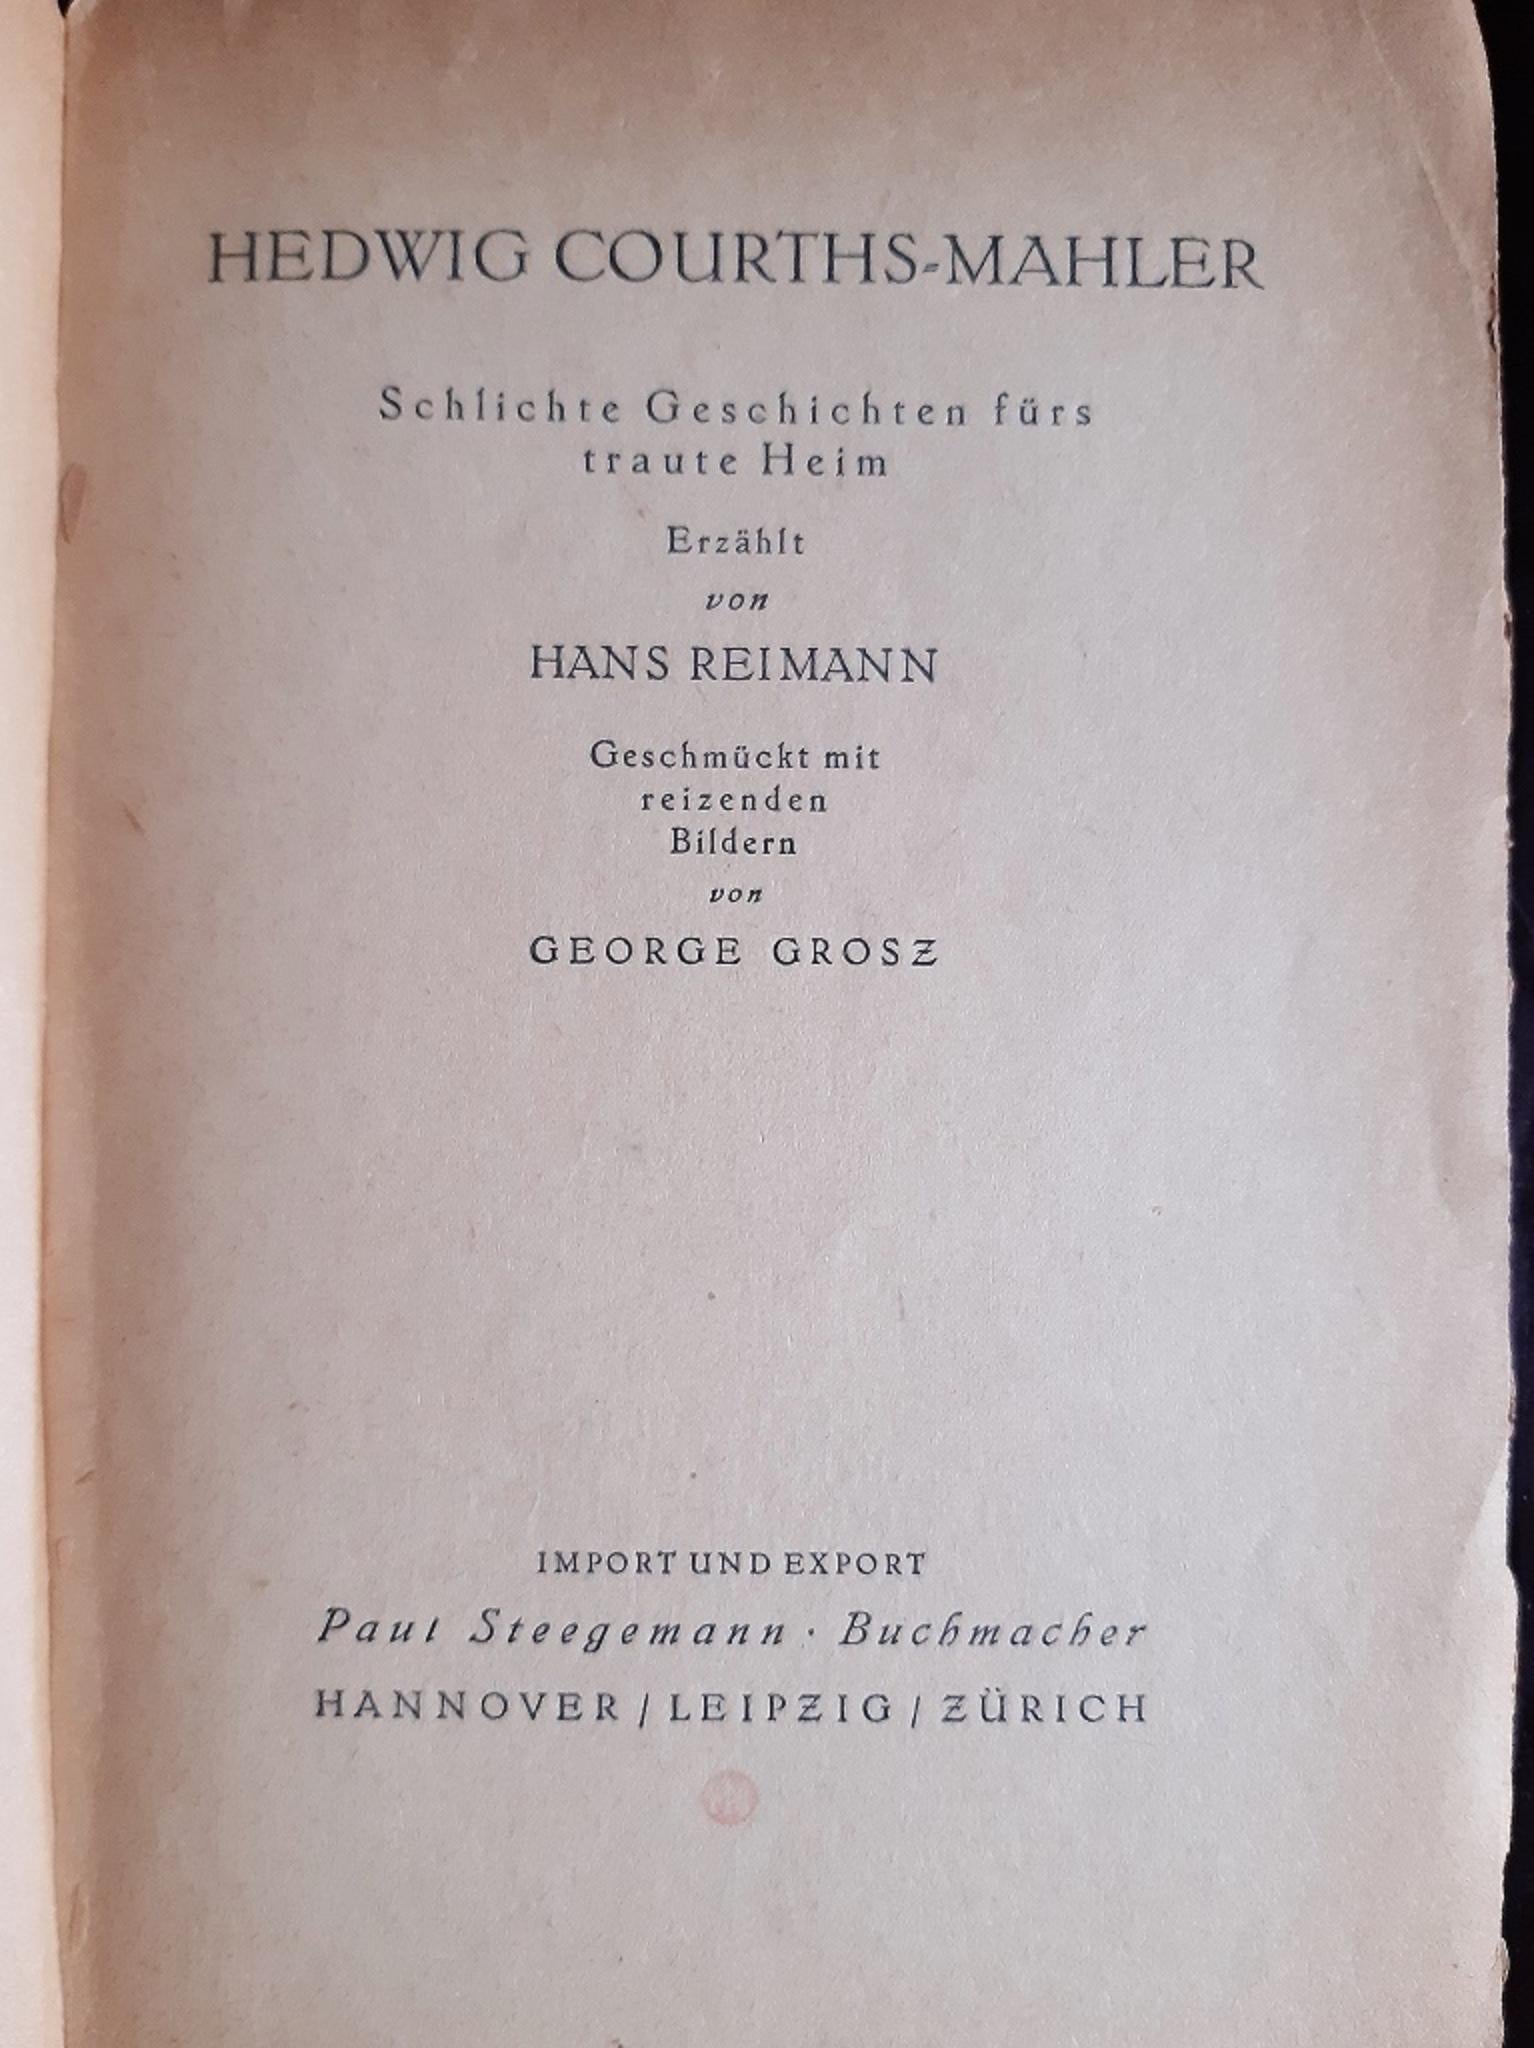 Hedwig Courths-Mahler is an original modern rare book written by Hans Reimann (1889–1969) and illustrated by George Grosz (Berlin, 1823 - 1959, Berlin) in 1922.

Original First Edition.

Published by Steegemann, Hannover.

Format: in 8°.

The book